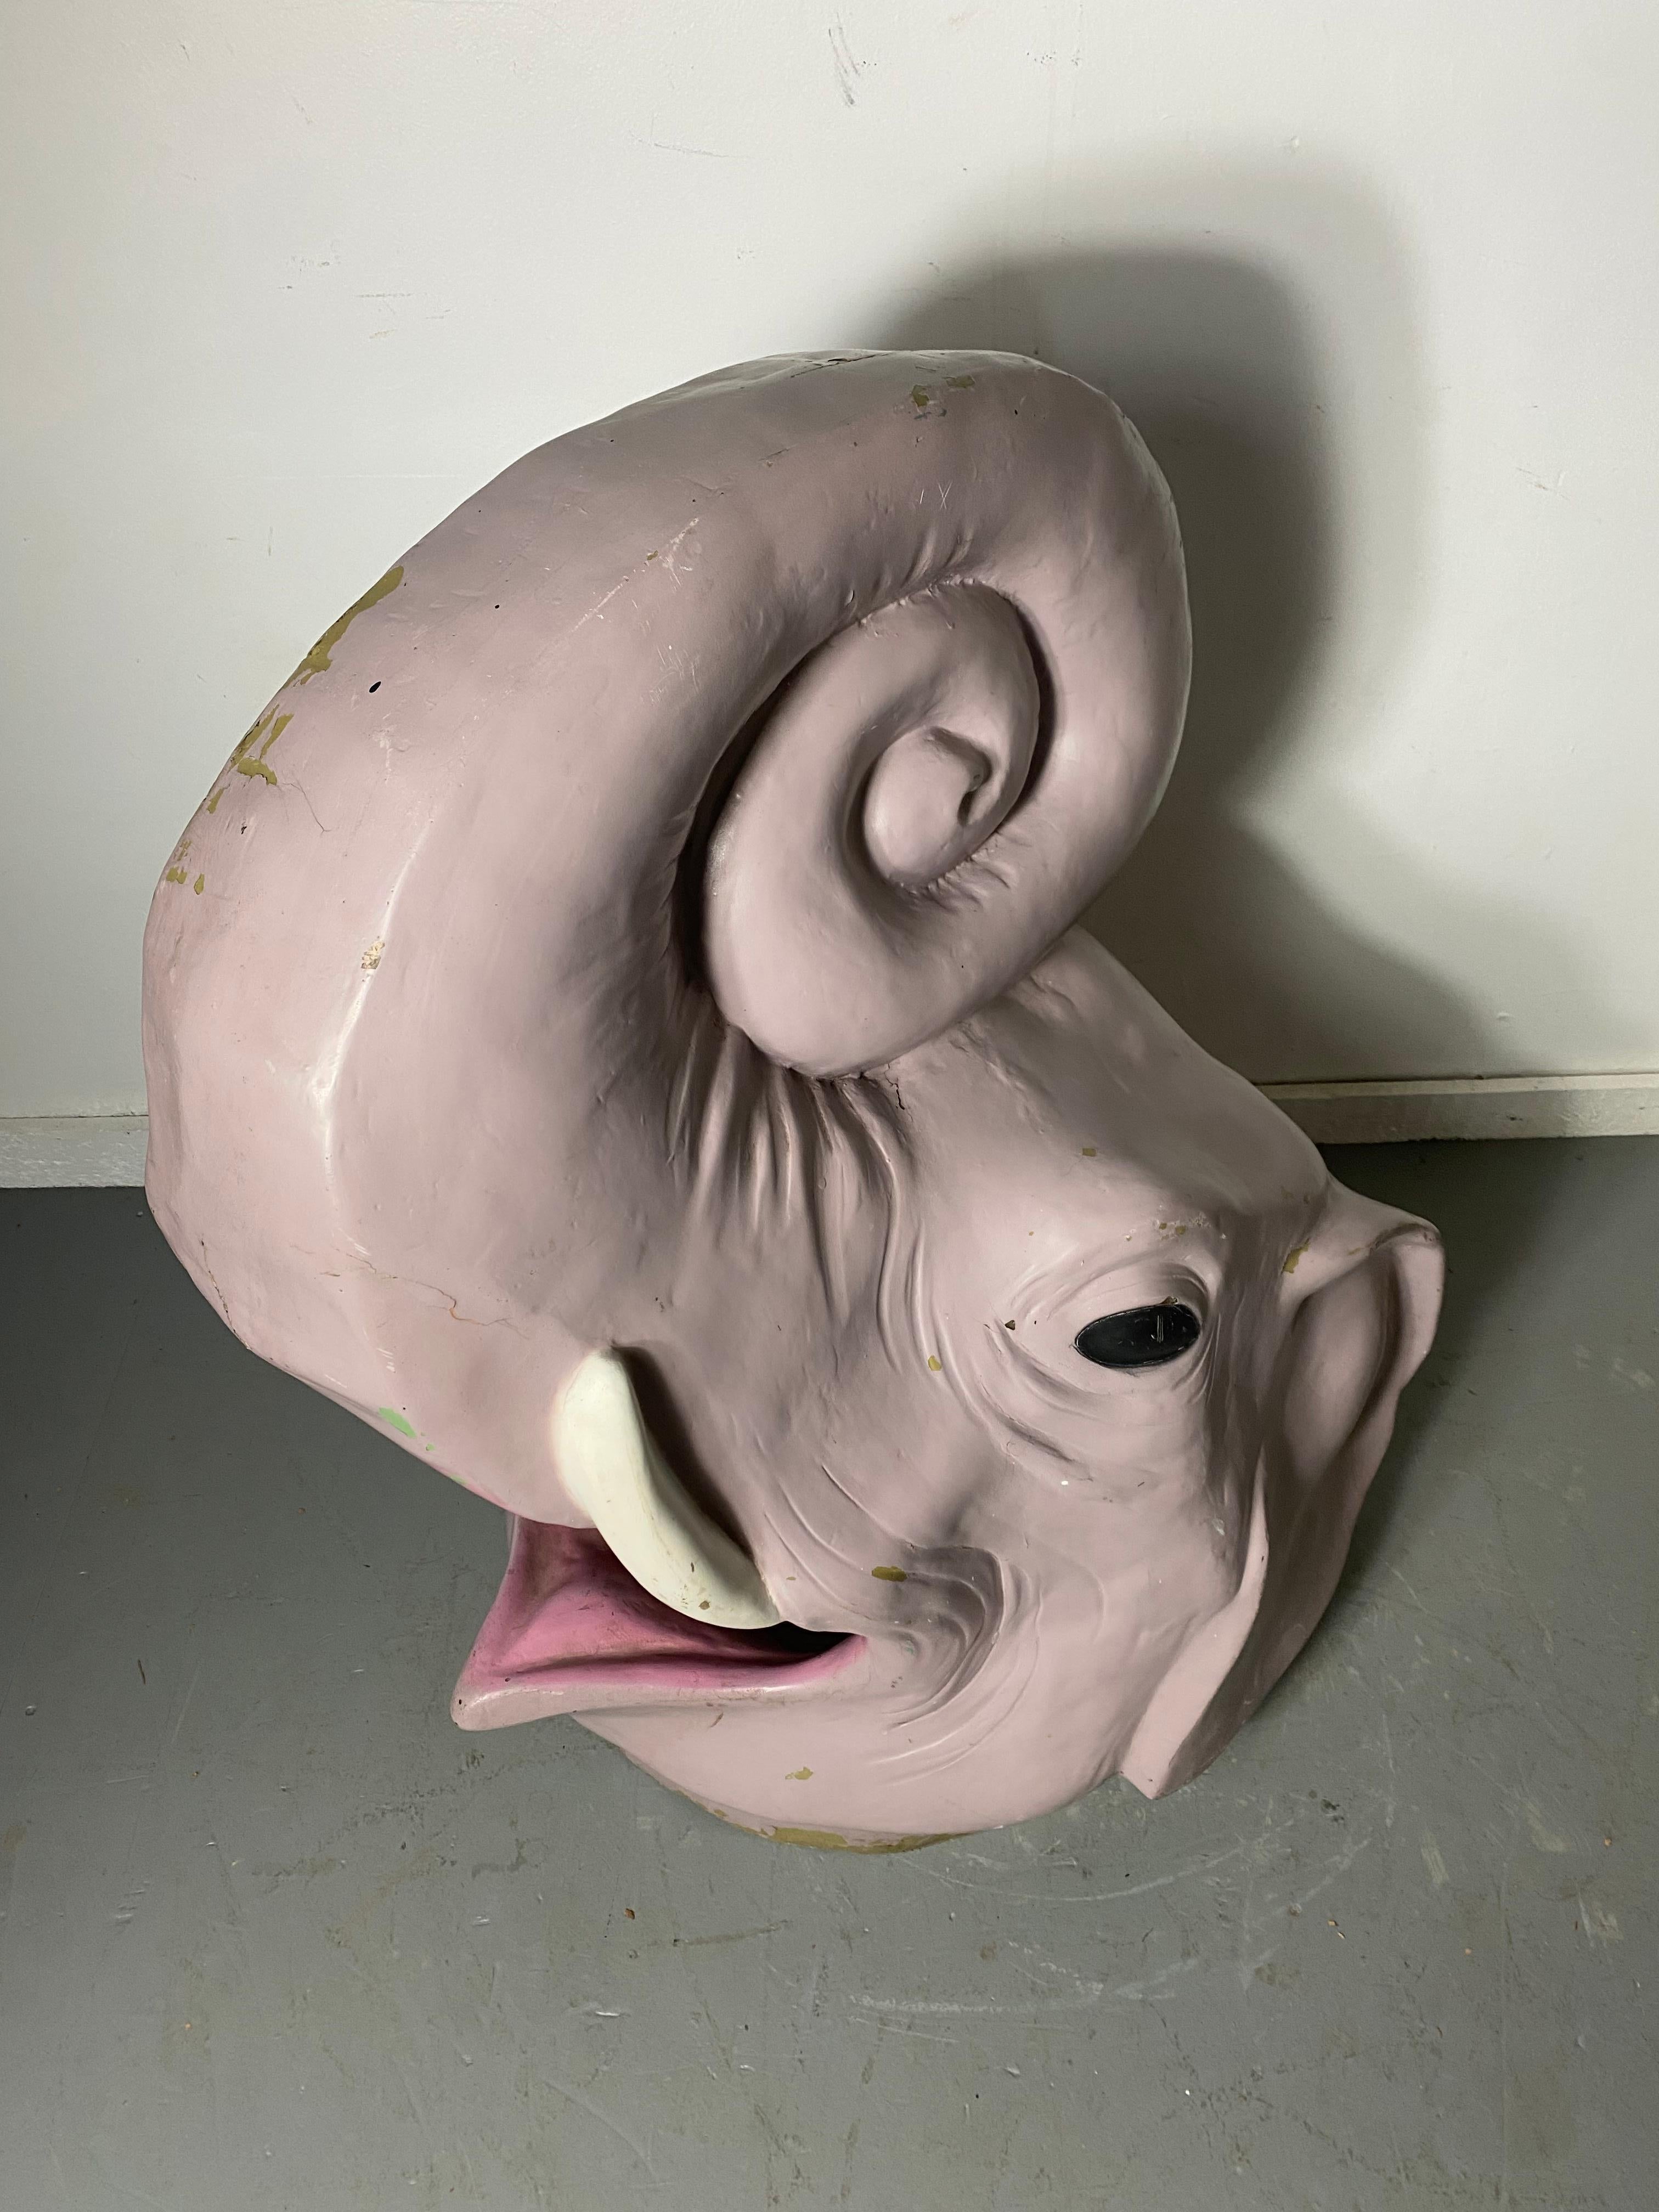 Large Whimsical Fiberglass Elephant head, carnival trash can lid / cover, manufactured by the International Fiferglass Company, Venice California. This item was salvaged from Famed Fantasy Island amusement park. Located just outside of Buffalo New